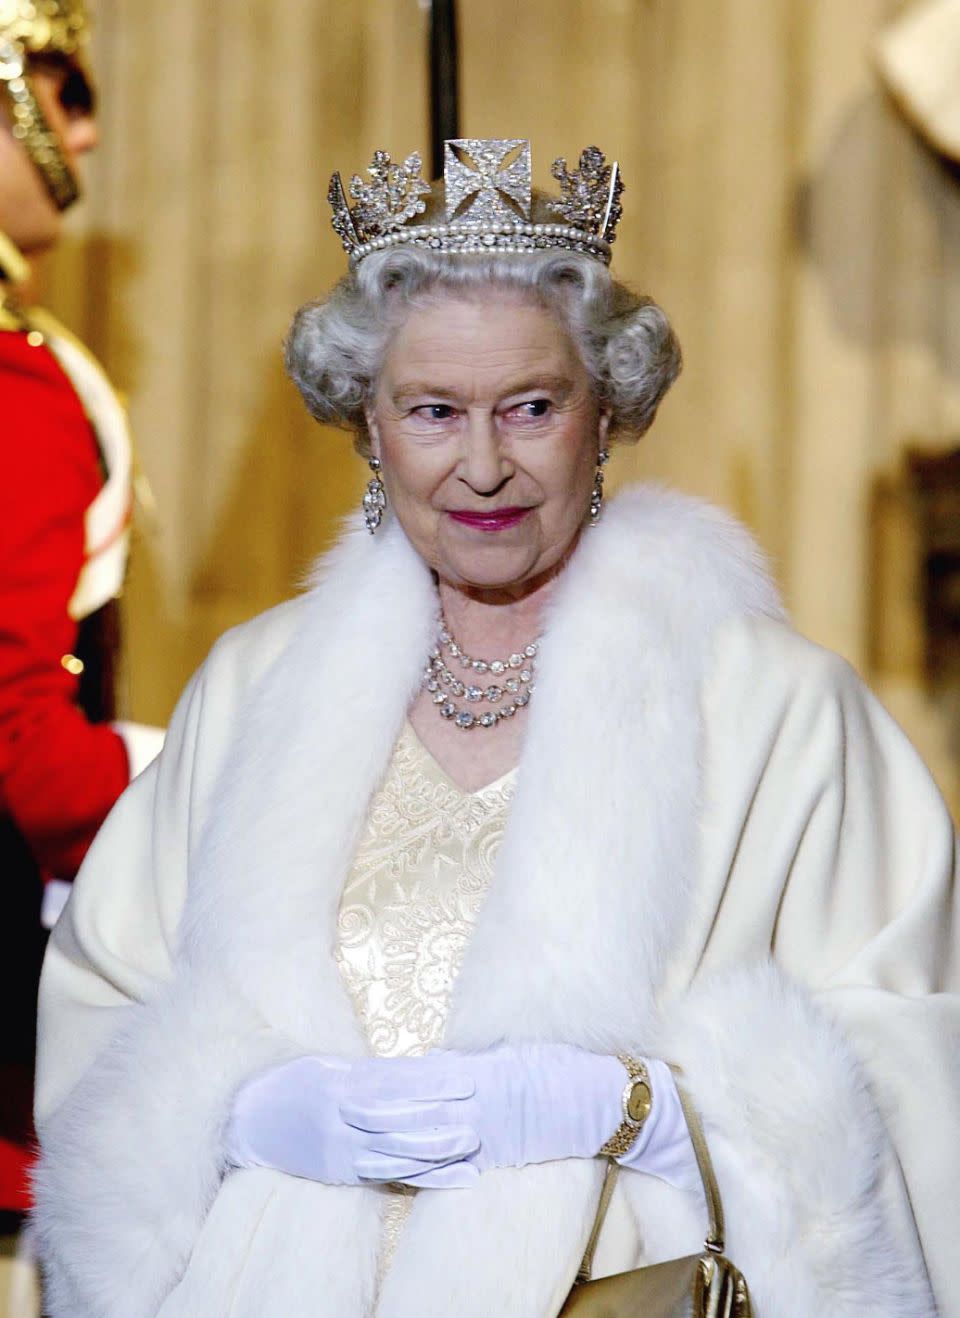 Queen Elizabeth has made a rare comment about who she believes should succeed her. Photo: Getty Images